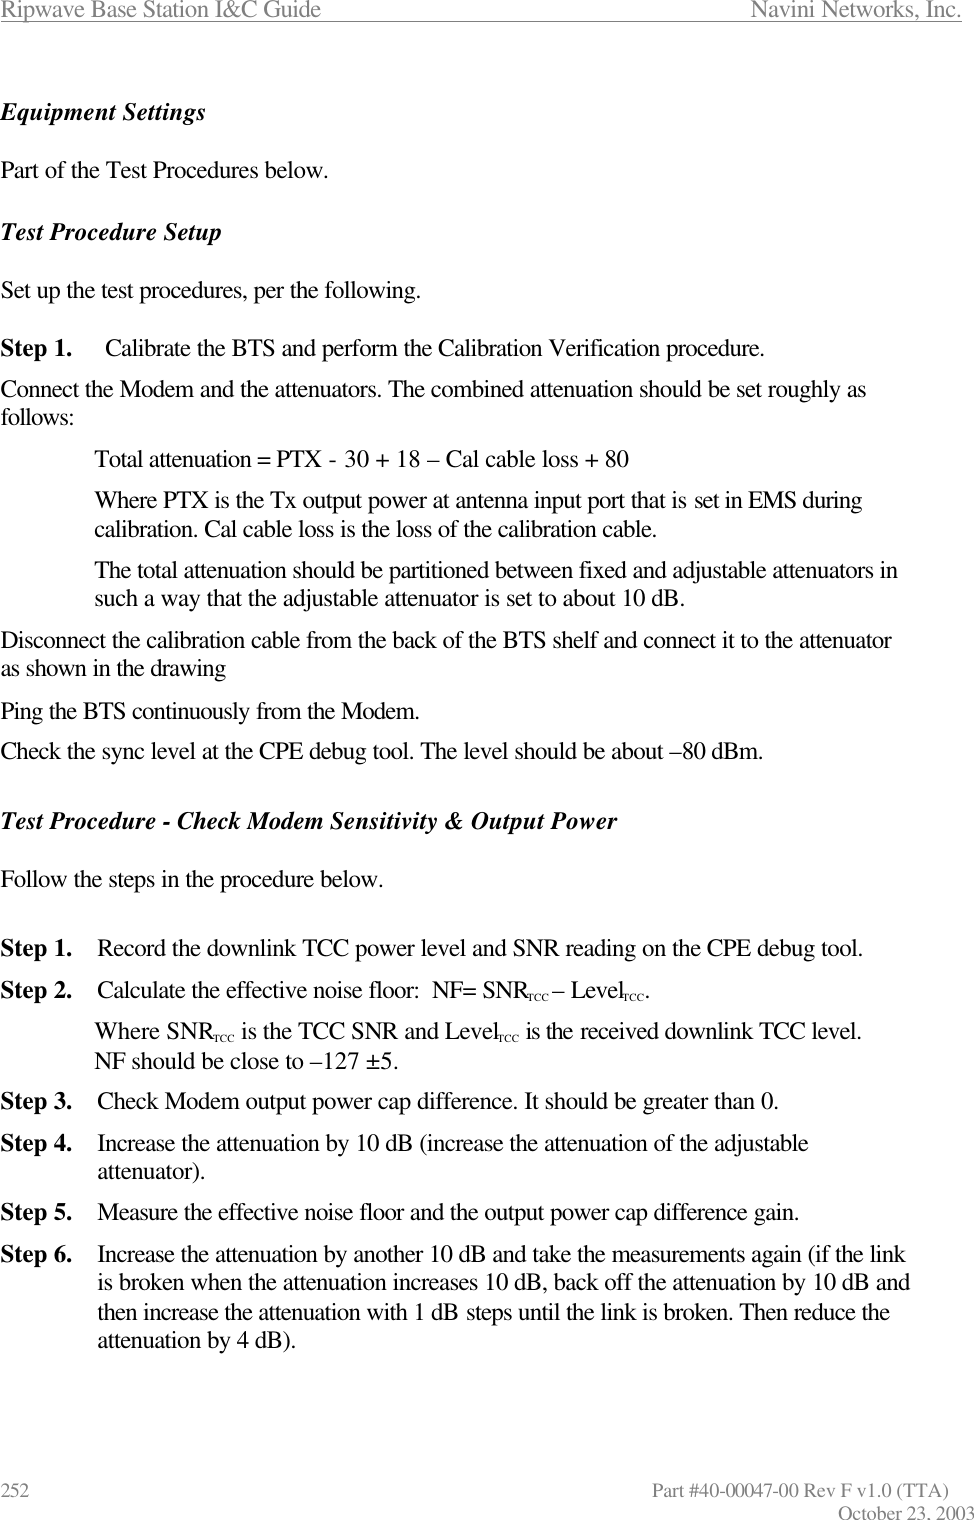 Ripwave Base Station I&amp;C Guide                      Navini Networks, Inc. 252                   Part #40-00047-00 Rev F v1.0 (TTA) October 23, 2003  Equipment Settings  Part of the Test Procedures below.  Test Procedure Setup  Set up the test procedures, per the following.  Step 1. Calibrate the BTS and perform the Calibration Verification procedure.  Connect the Modem and the attenuators. The combined attenuation should be set roughly as follows: Total attenuation = PTX - 30 + 18 – Cal cable loss + 80 Where PTX is the Tx output power at antenna input port that is set in EMS during calibration. Cal cable loss is the loss of the calibration cable.  The total attenuation should be partitioned between fixed and adjustable attenuators in such a way that the adjustable attenuator is set to about 10 dB.  Disconnect the calibration cable from the back of the BTS shelf and connect it to the attenuator as shown in the drawing Ping the BTS continuously from the Modem.  Check the sync level at the CPE debug tool. The level should be about –80 dBm.  Test Procedure - Check Modem Sensitivity &amp; Output Power  Follow the steps in the procedure below.  Step 1. Record the downlink TCC power level and SNR reading on the CPE debug tool.  Step 2. Calculate the effective noise floor:  NF= SNRTCC – LevelTCC.  Where SNRTCC is the TCC SNR and LevelTCC is the received downlink TCC level.  NF should be close to –127 ±5. Step 3. Check Modem output power cap difference. It should be greater than 0. Step 4. Increase the attenuation by 10 dB (increase the attenuation of the adjustable attenuator). Step 5. Measure the effective noise floor and the output power cap difference gain. Step 6. Increase the attenuation by another 10 dB and take the measurements again (if the link is broken when the attenuation increases 10 dB, back off the attenuation by 10 dB and then increase the attenuation with 1 dB steps until the link is broken. Then reduce the attenuation by 4 dB).  